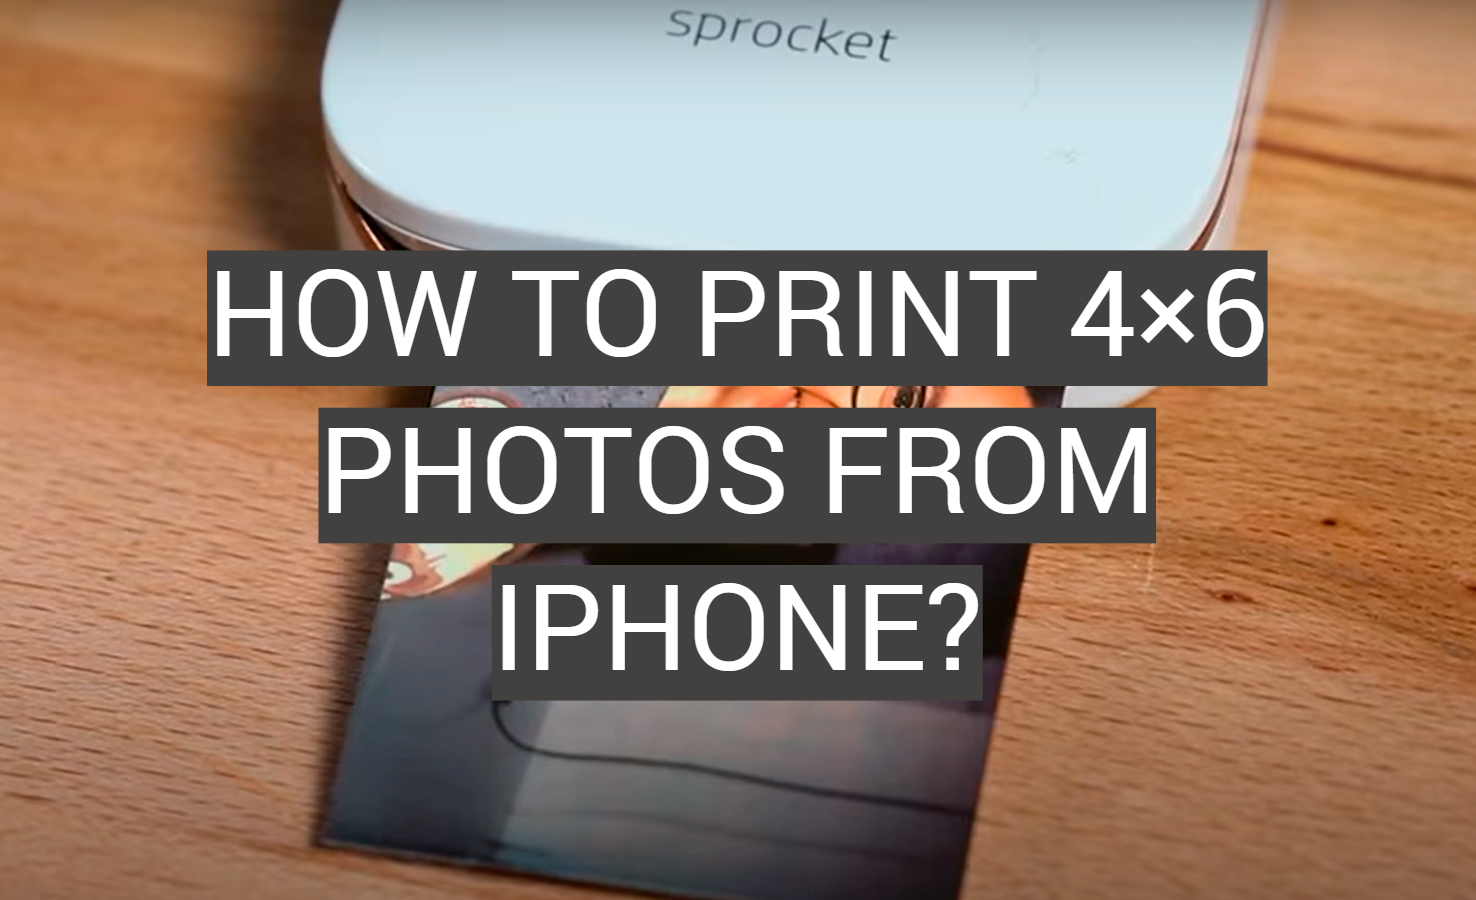 How to Print 4×6 Photos From iPhone?